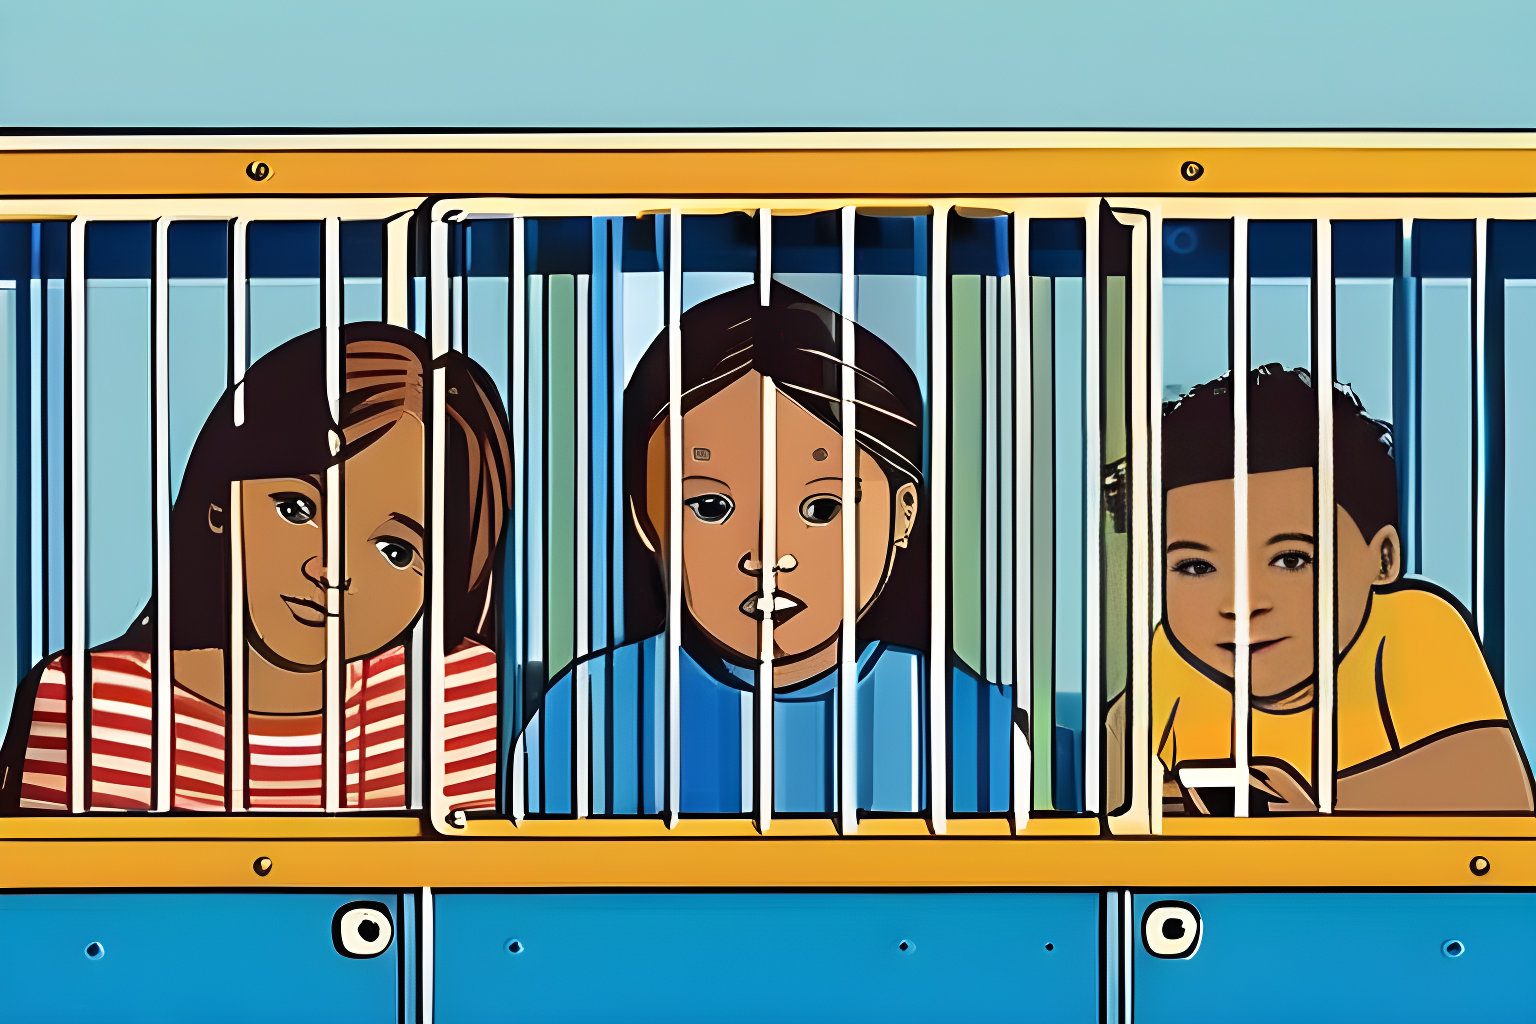 Multiple children in a blue cage, staring at smartphones.